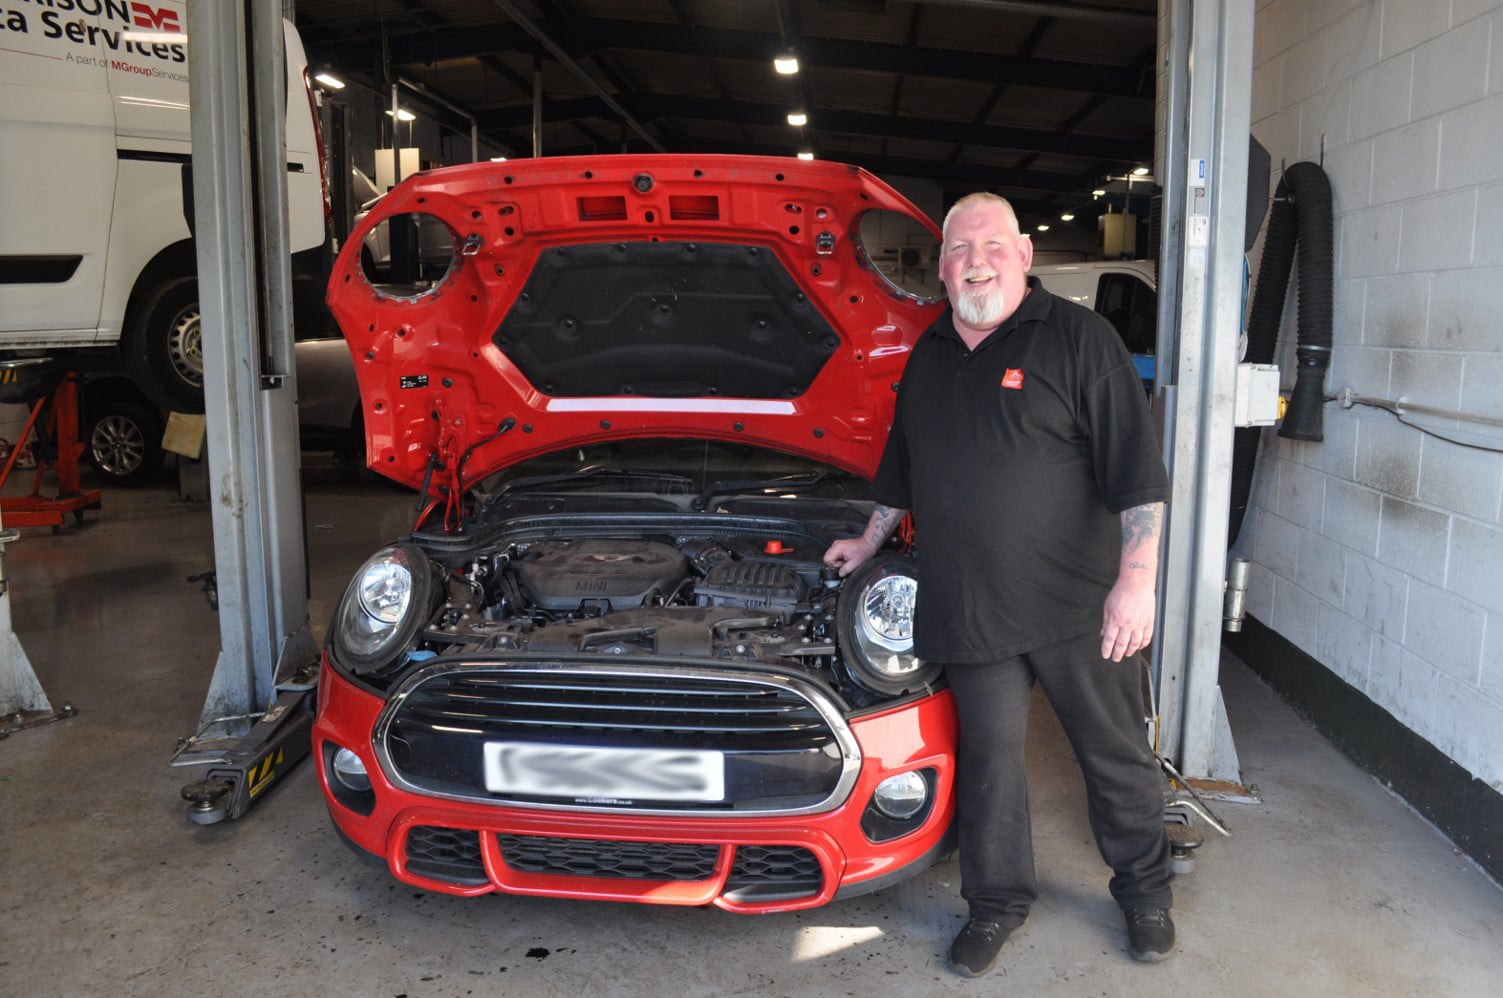 Image of Steven Britton standing in front of a car - Steven is one of our Contract Vehicle Technicians and Ambassador